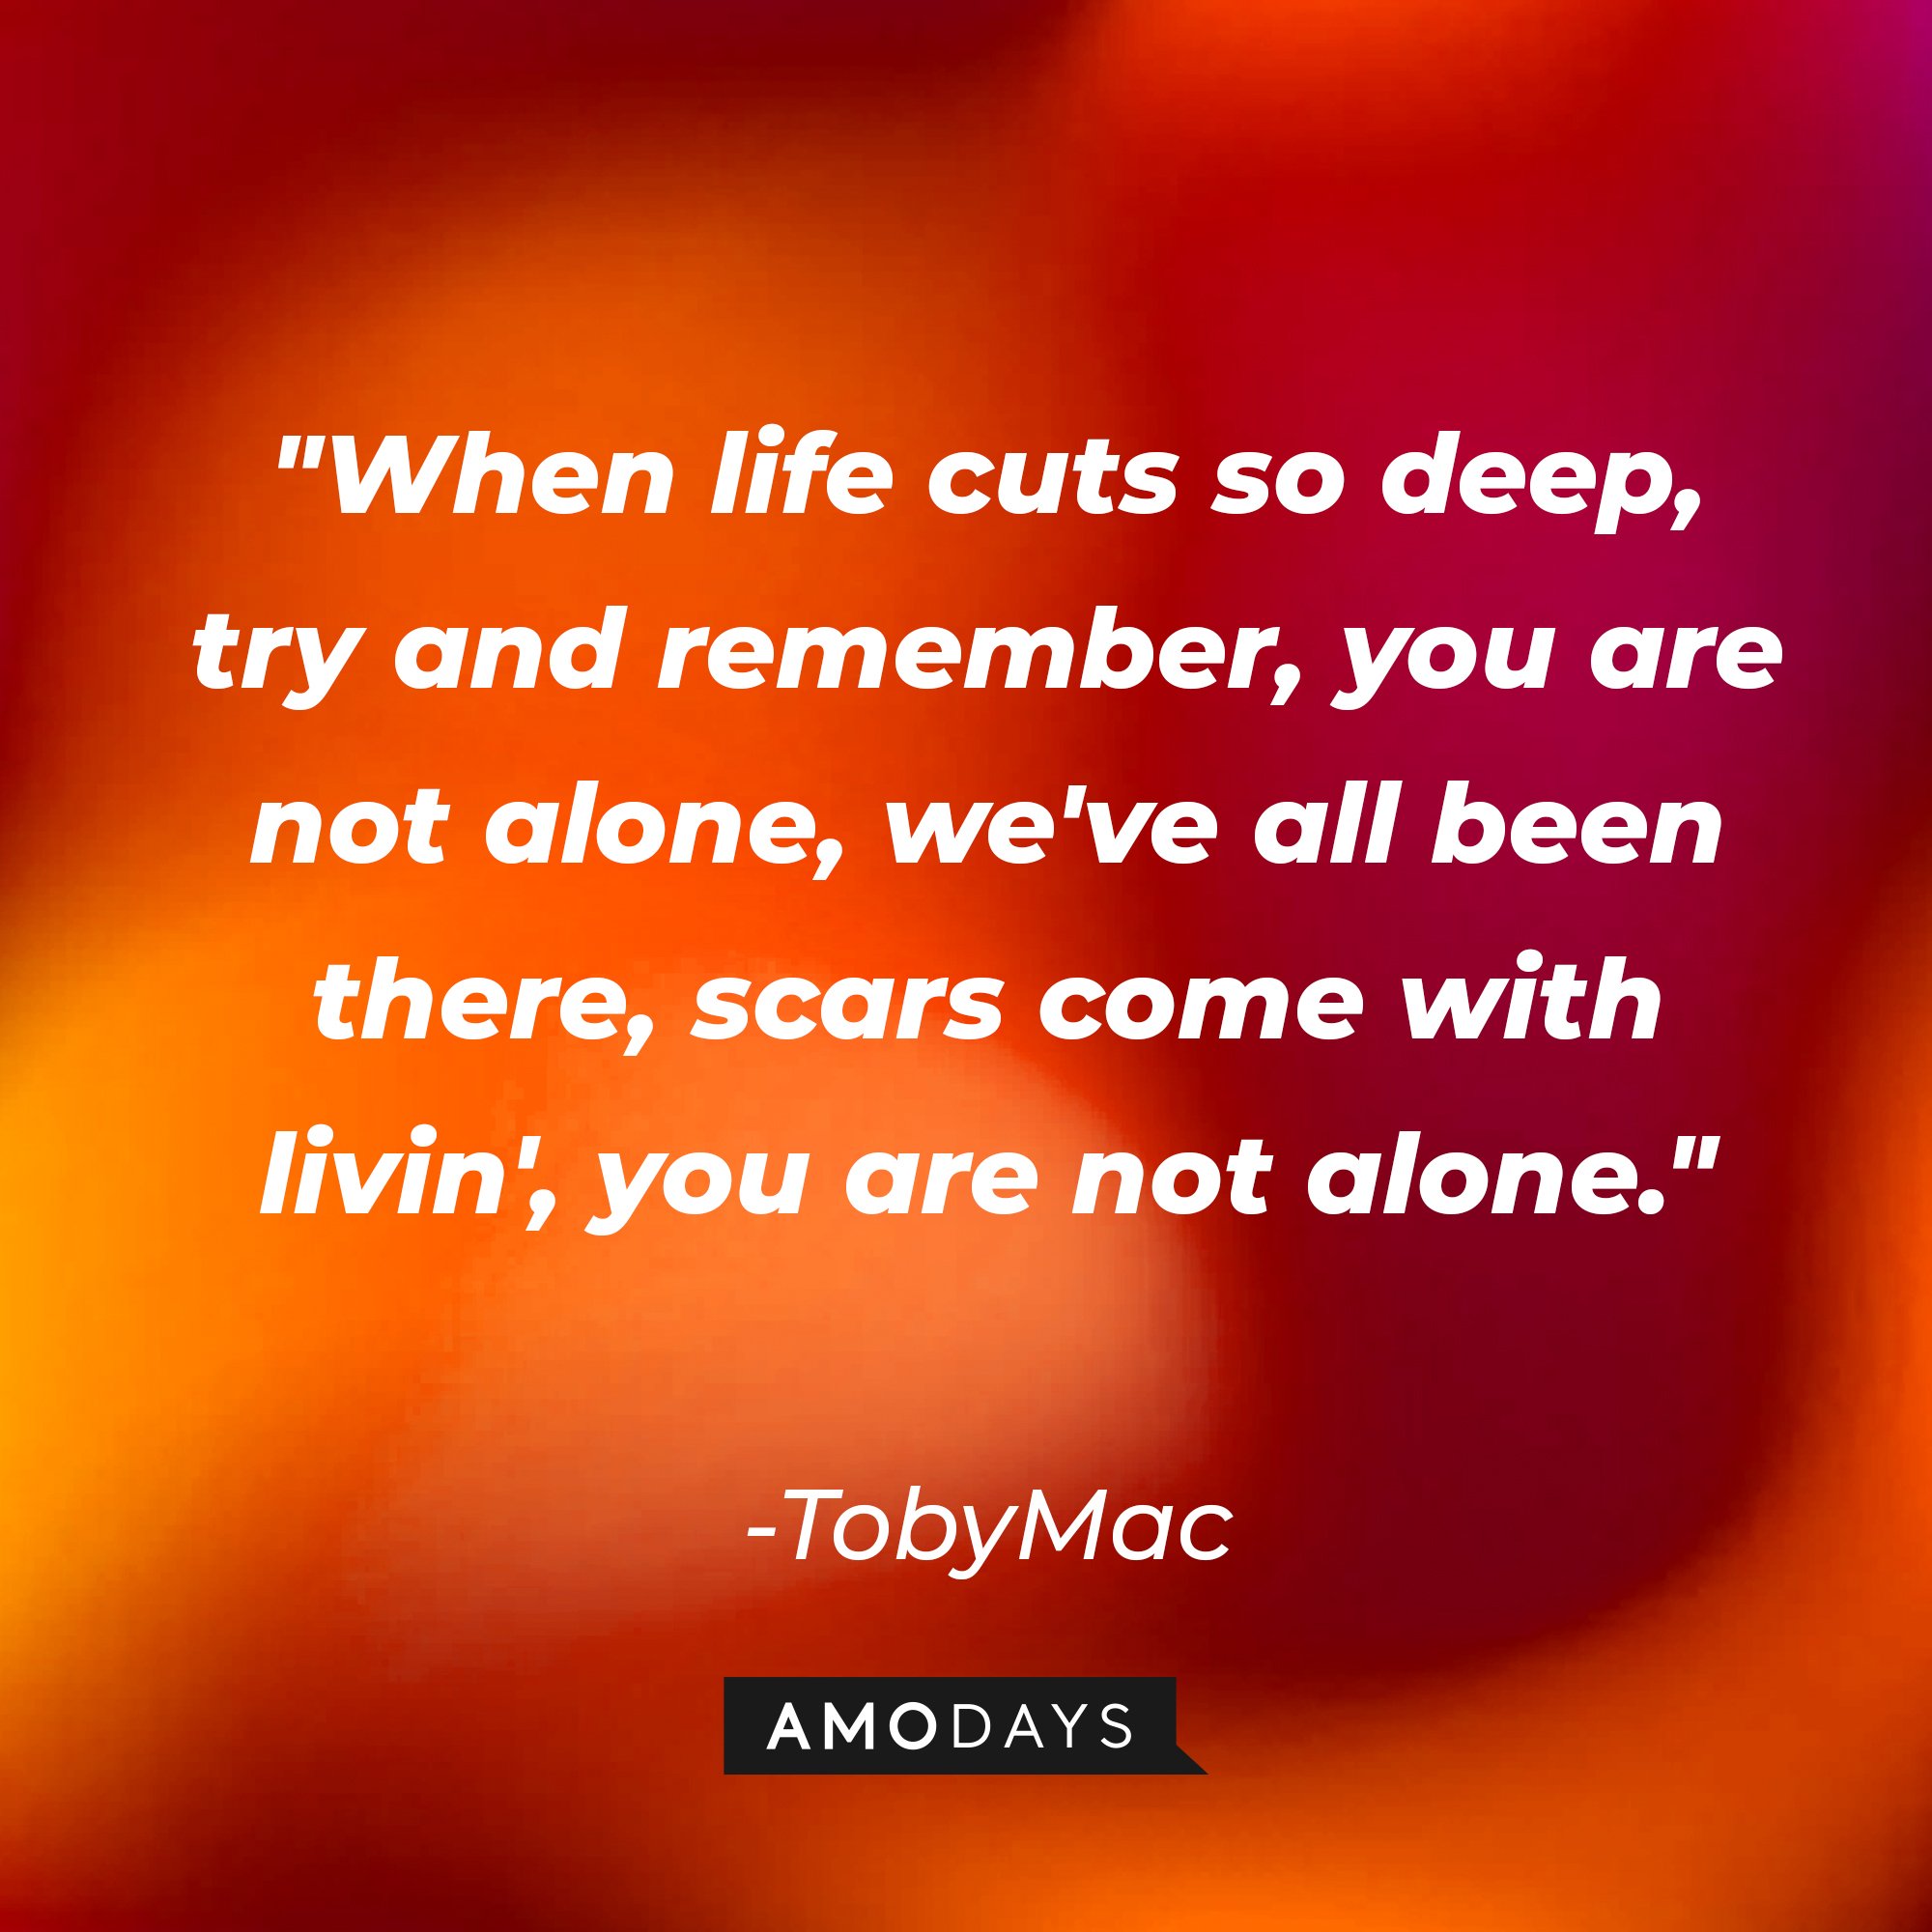 TobyMac's quote: "When life cuts so deep, try and remember, you are not alone, we've all been there, scars come with livin', you are not alone." | Image: AmoDays